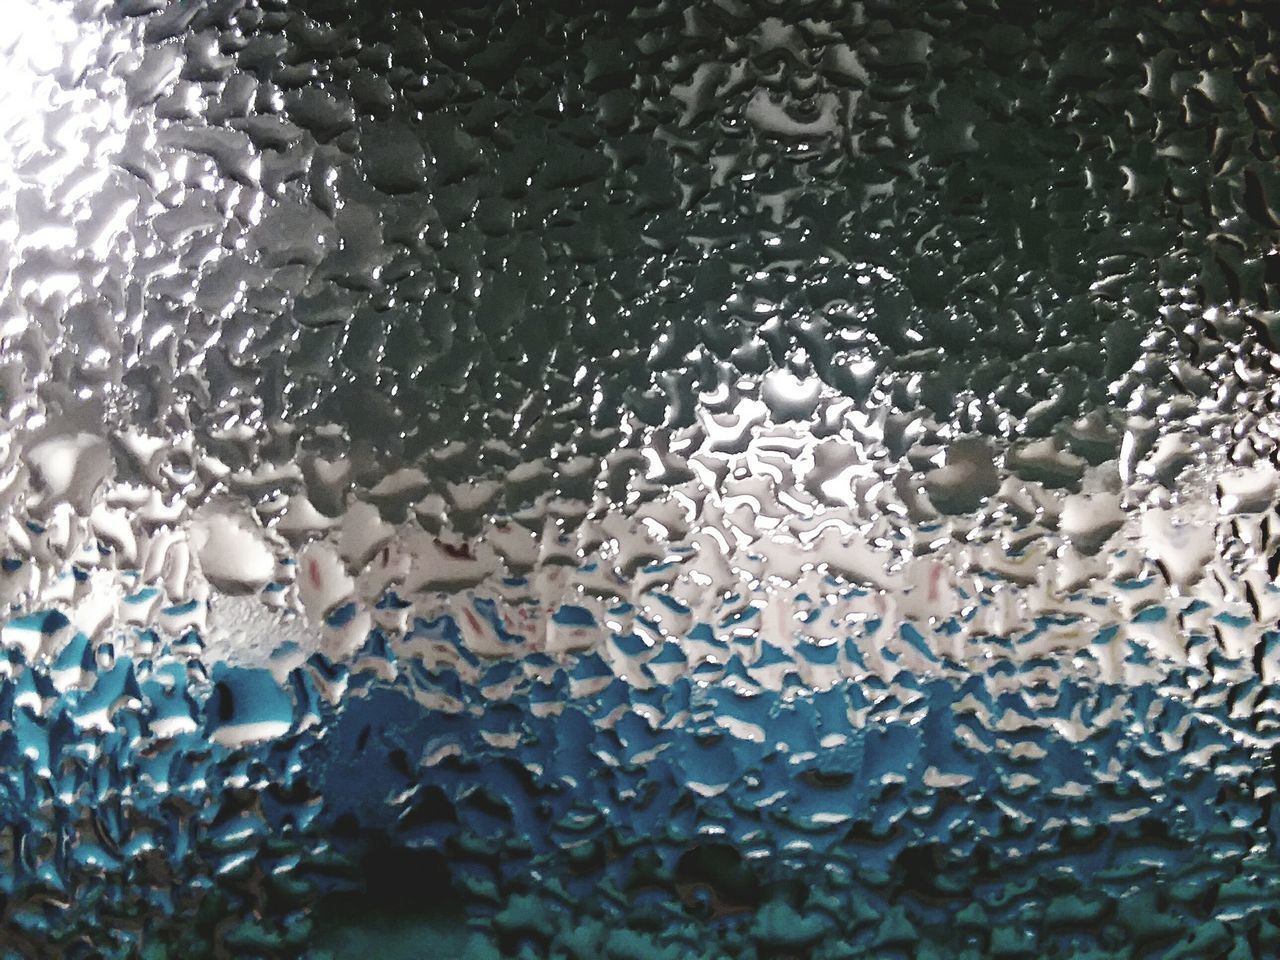 CLOSE-UP OF WET GLASS WINDOW